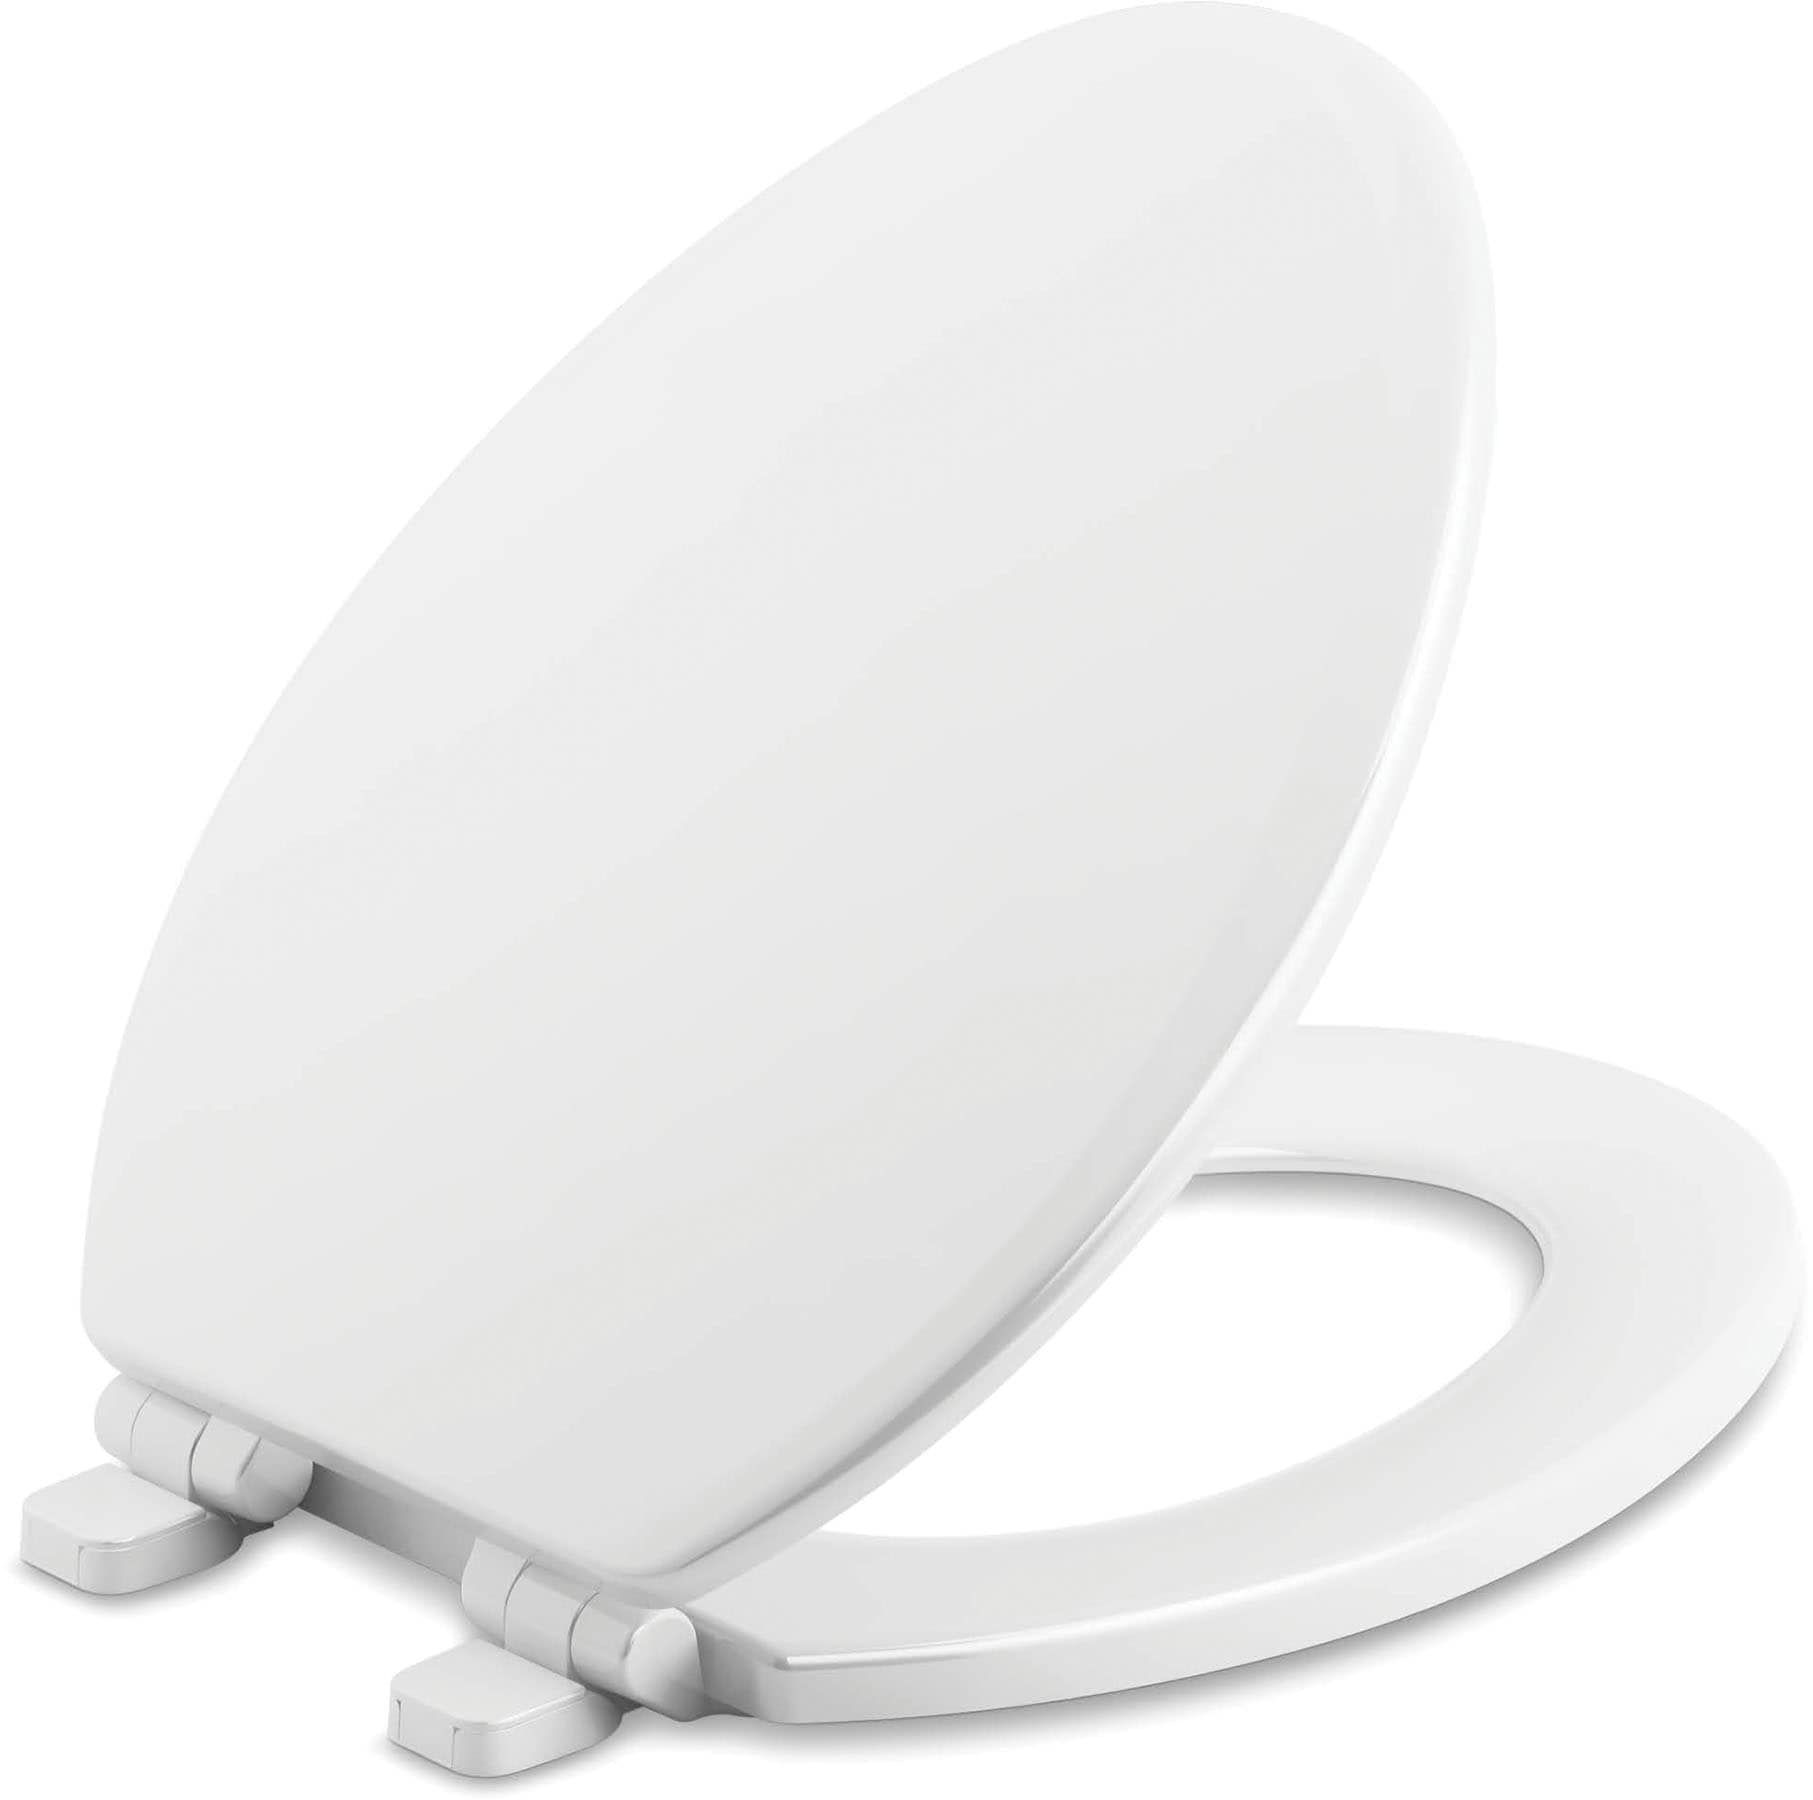 MUJIUSHI Soft Close Toilet Seat with One Button Quick Release & Simple Top Fixing D/U Shape Toilet Seat for Easy Installation & Cleaning Toilet Seat 